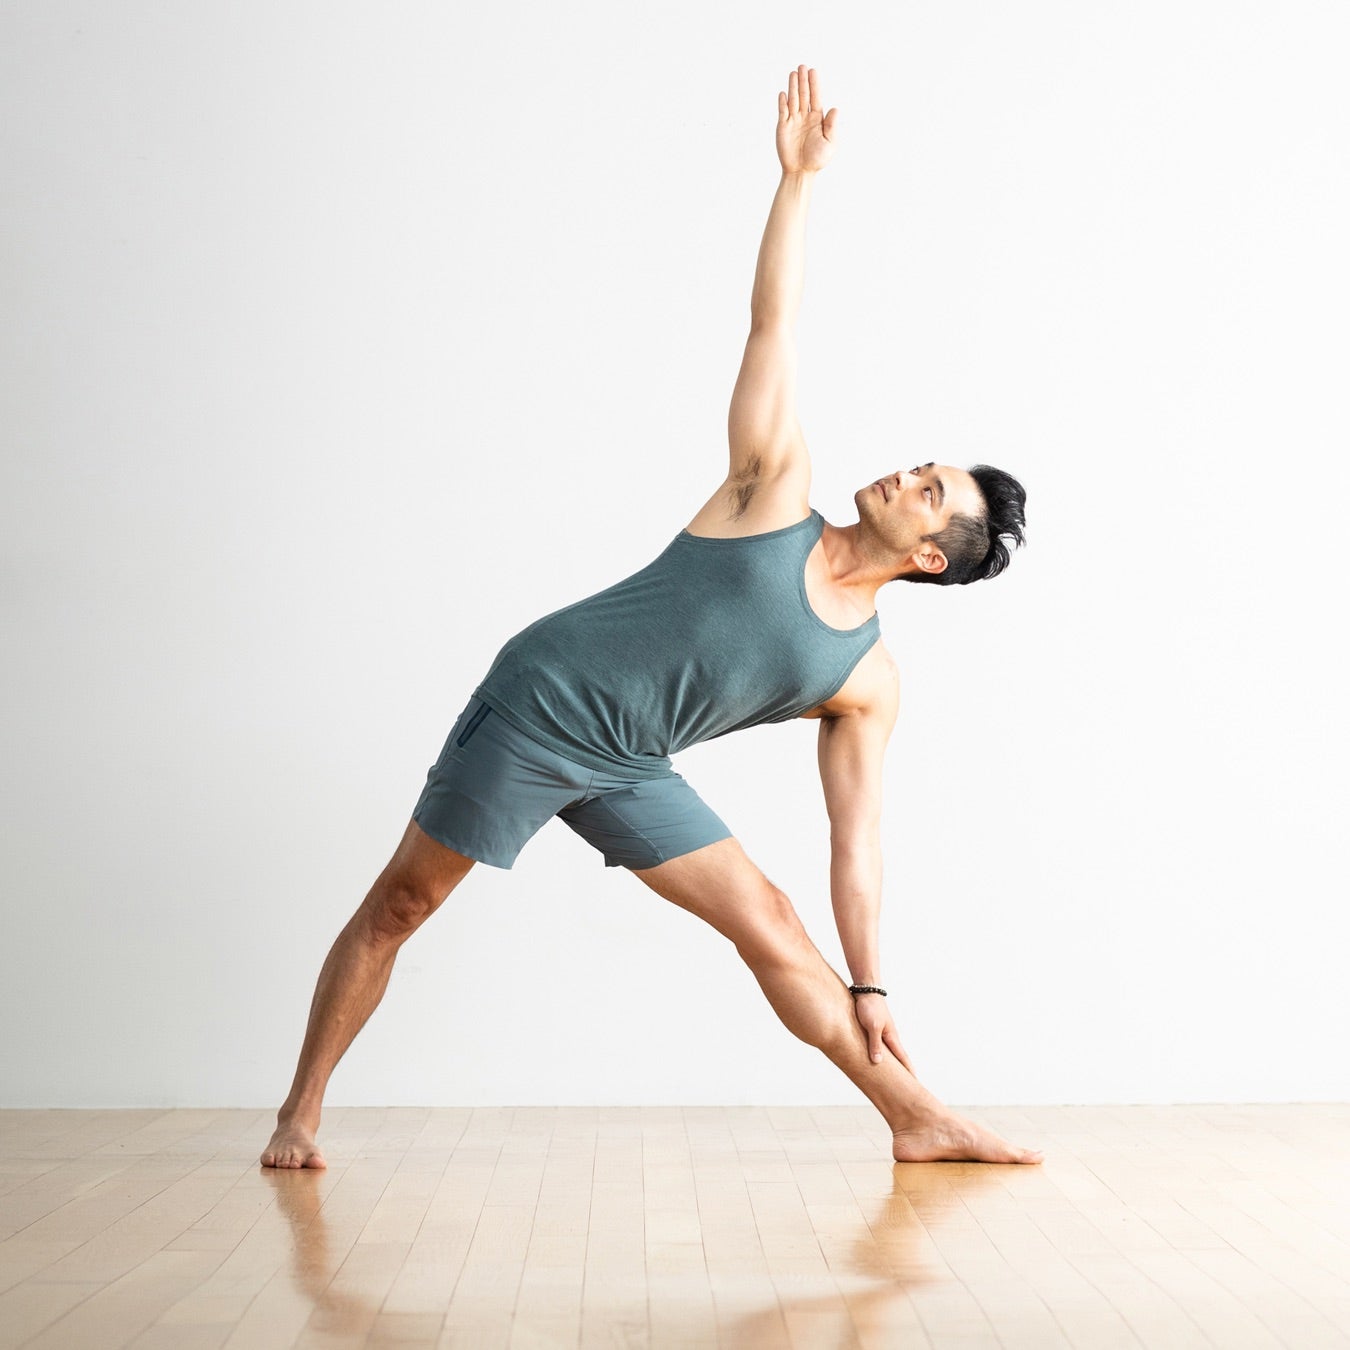 10 Energy-Boosting Yoga Poses Inspired by Spring - Yoga Journal